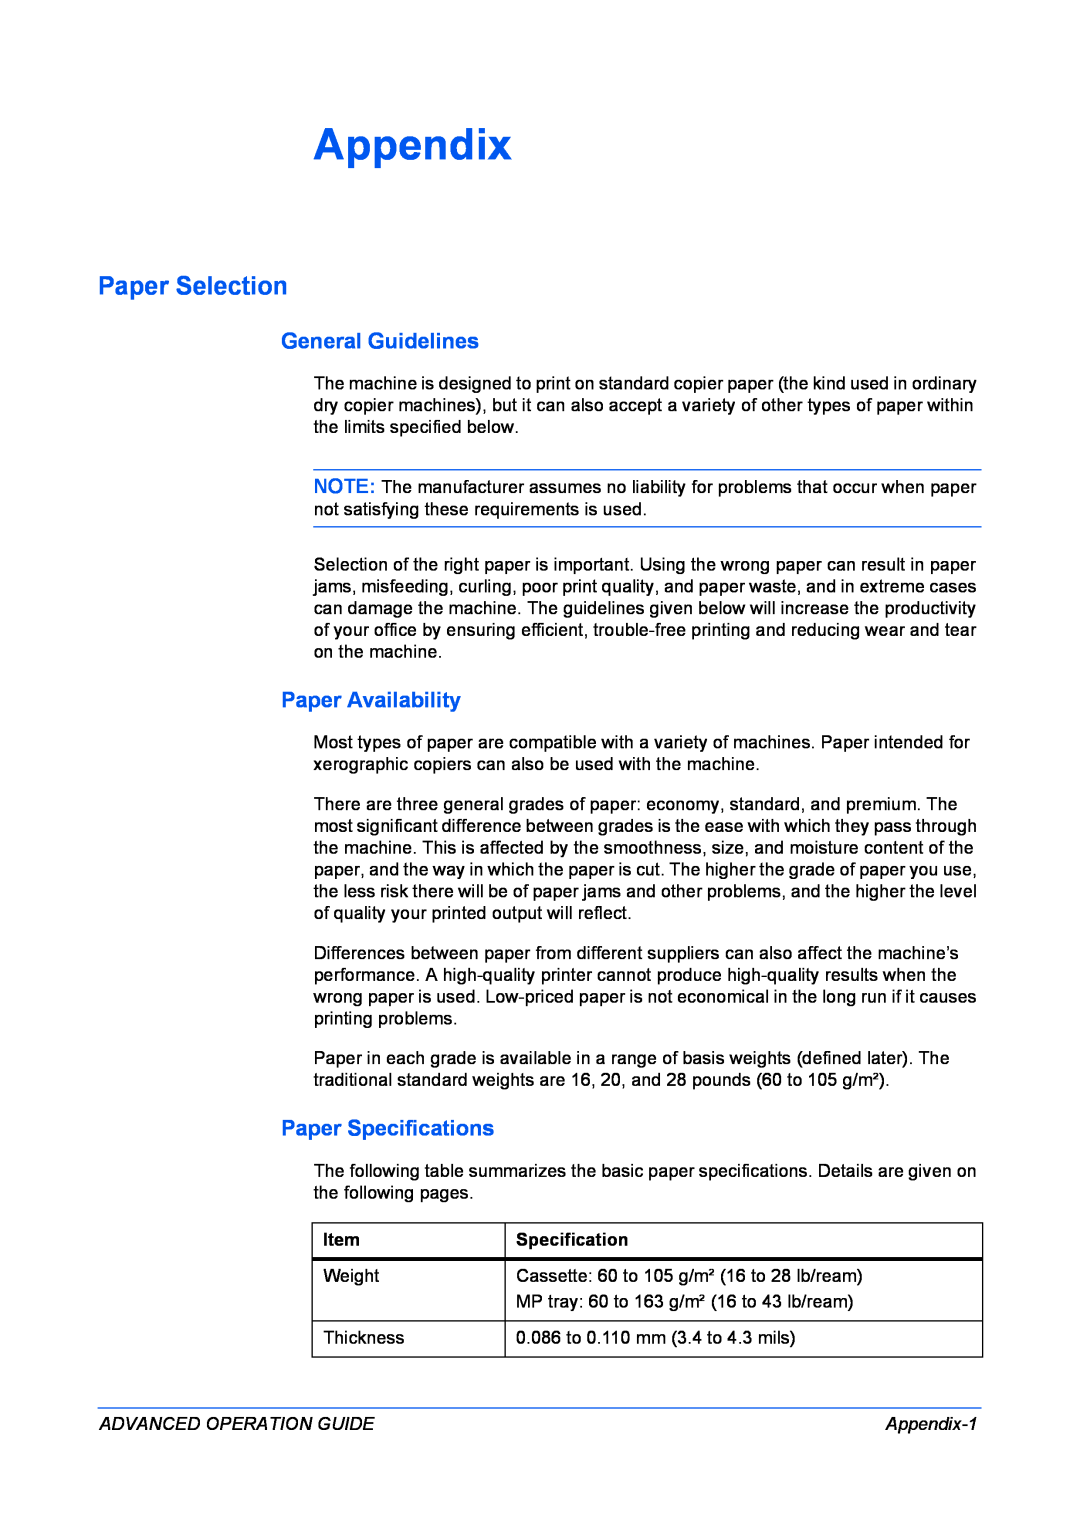 Kyocera KM-1820 manual Appendix, Paper Selection, General Guidelines, Paper Availability, Paper Specifications 